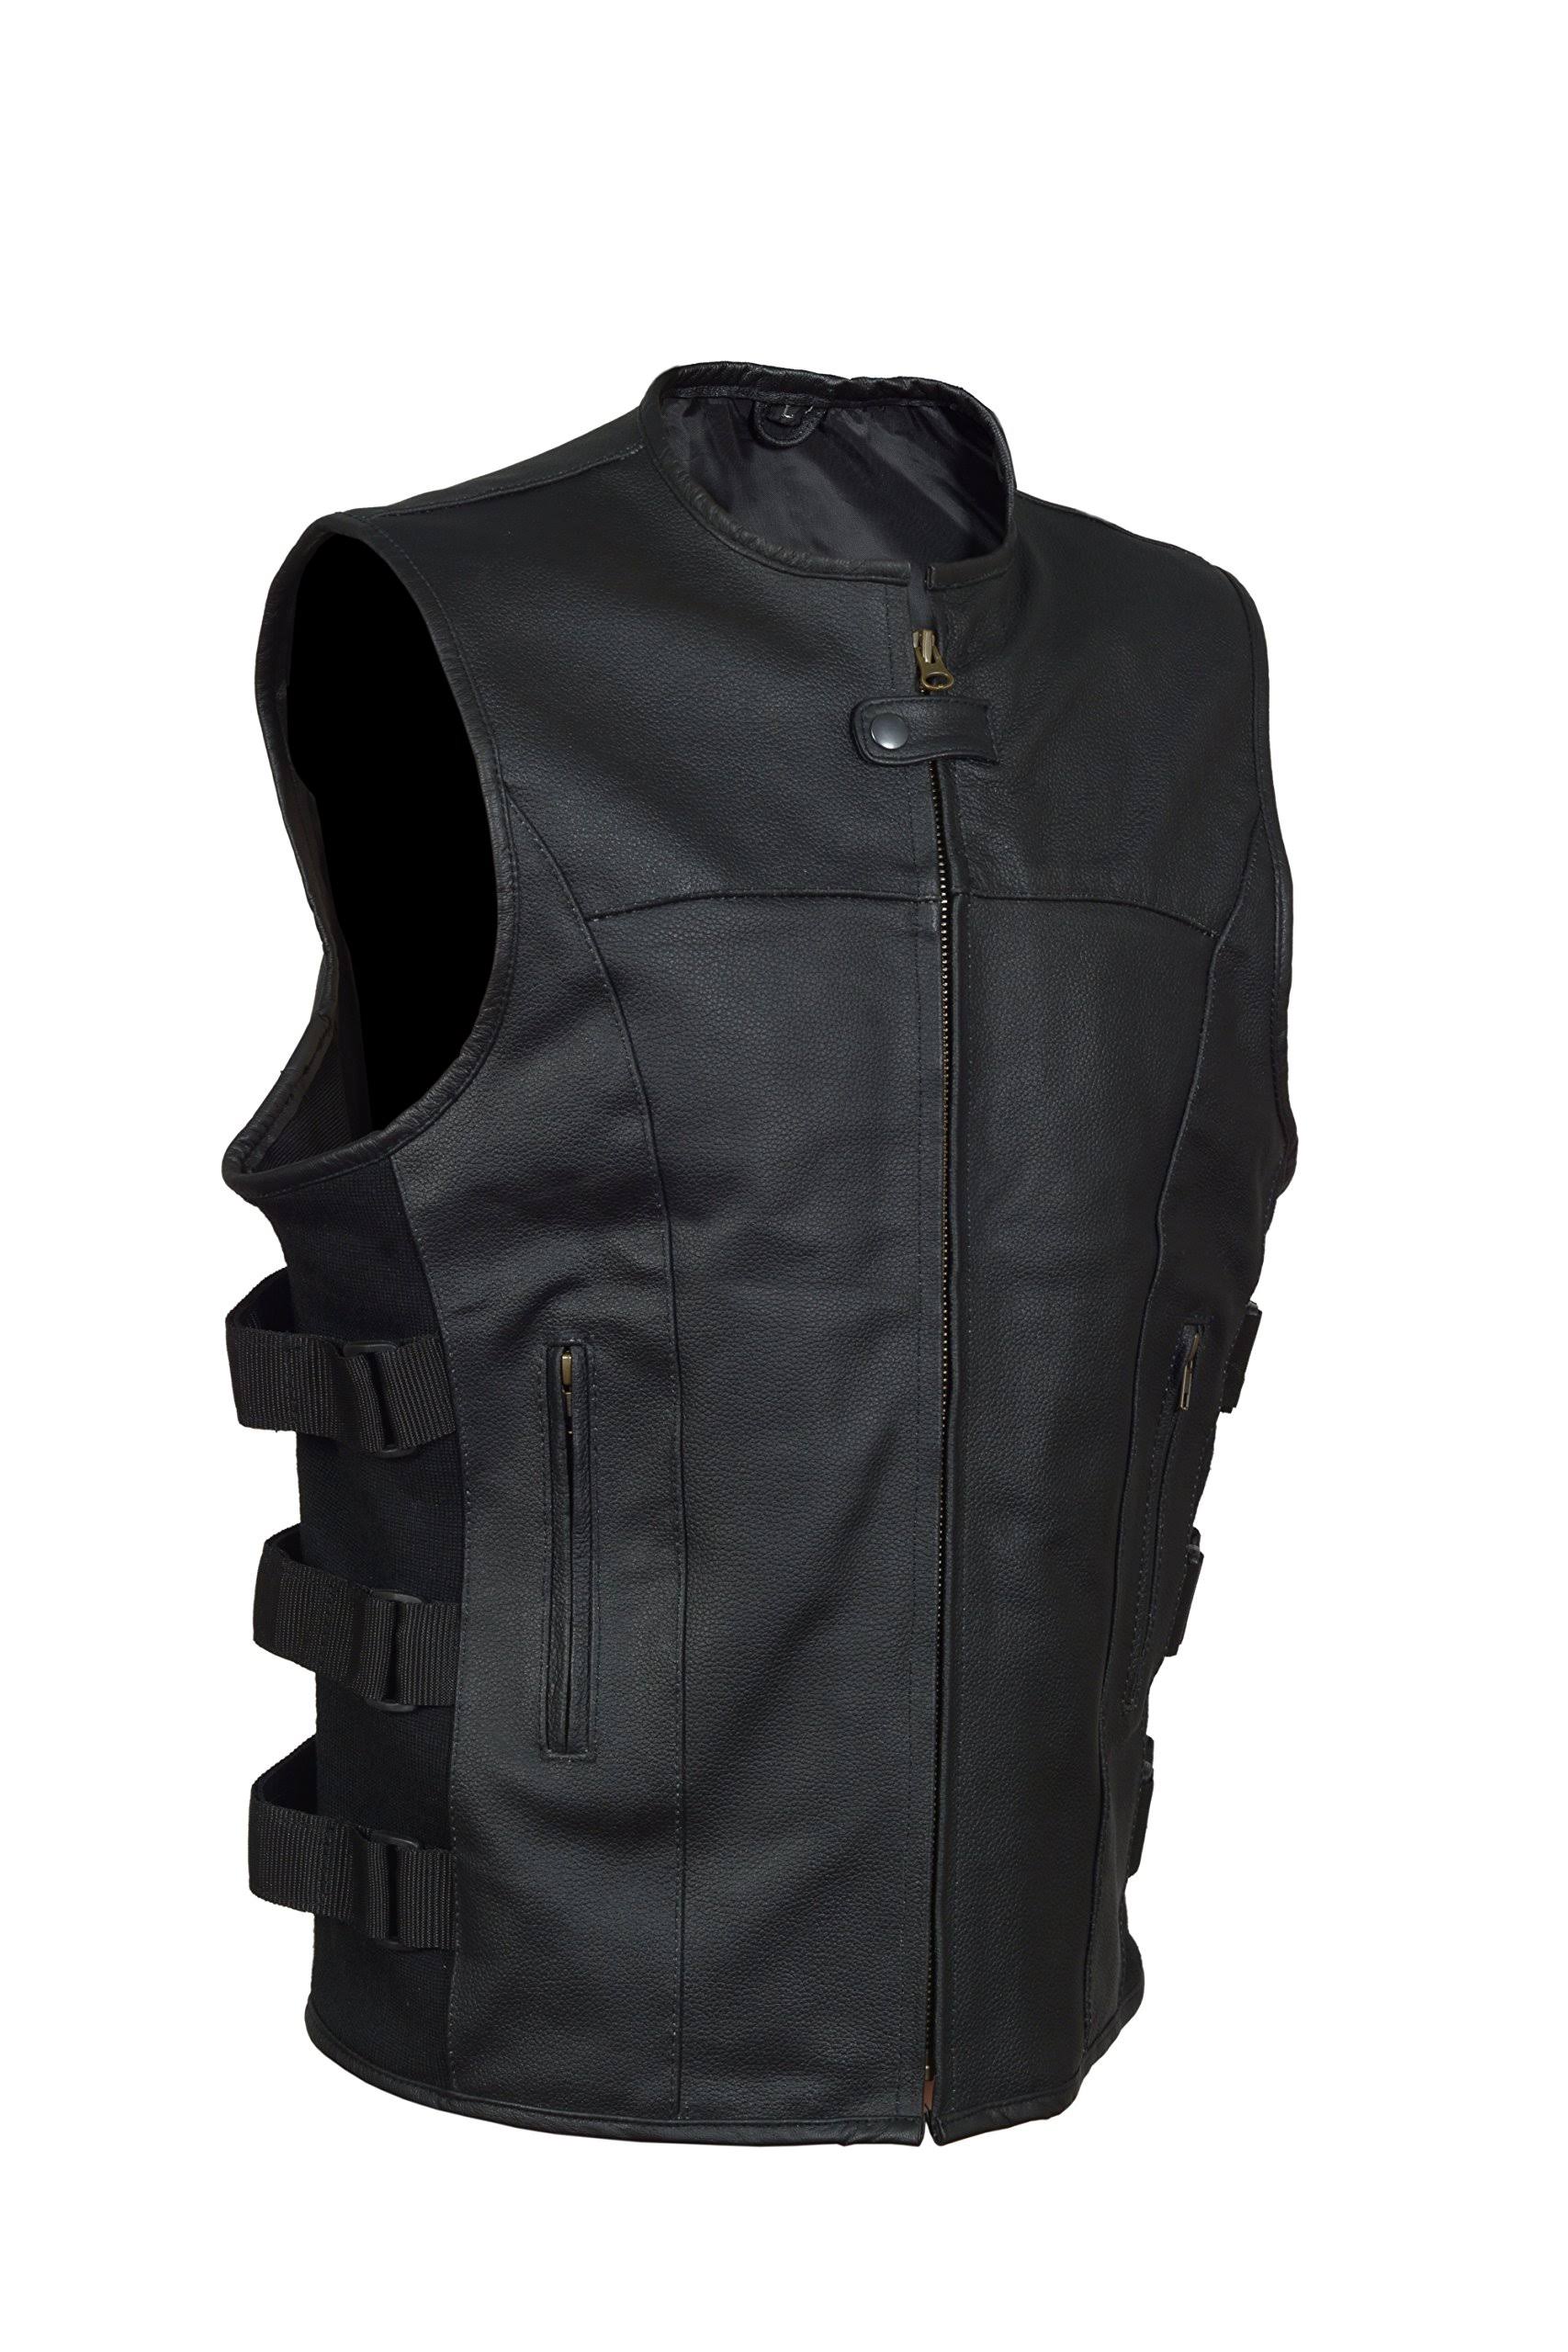 Men&s Swat Style Motorcycle Biker Leather Vest with Two Concealed Gun ...